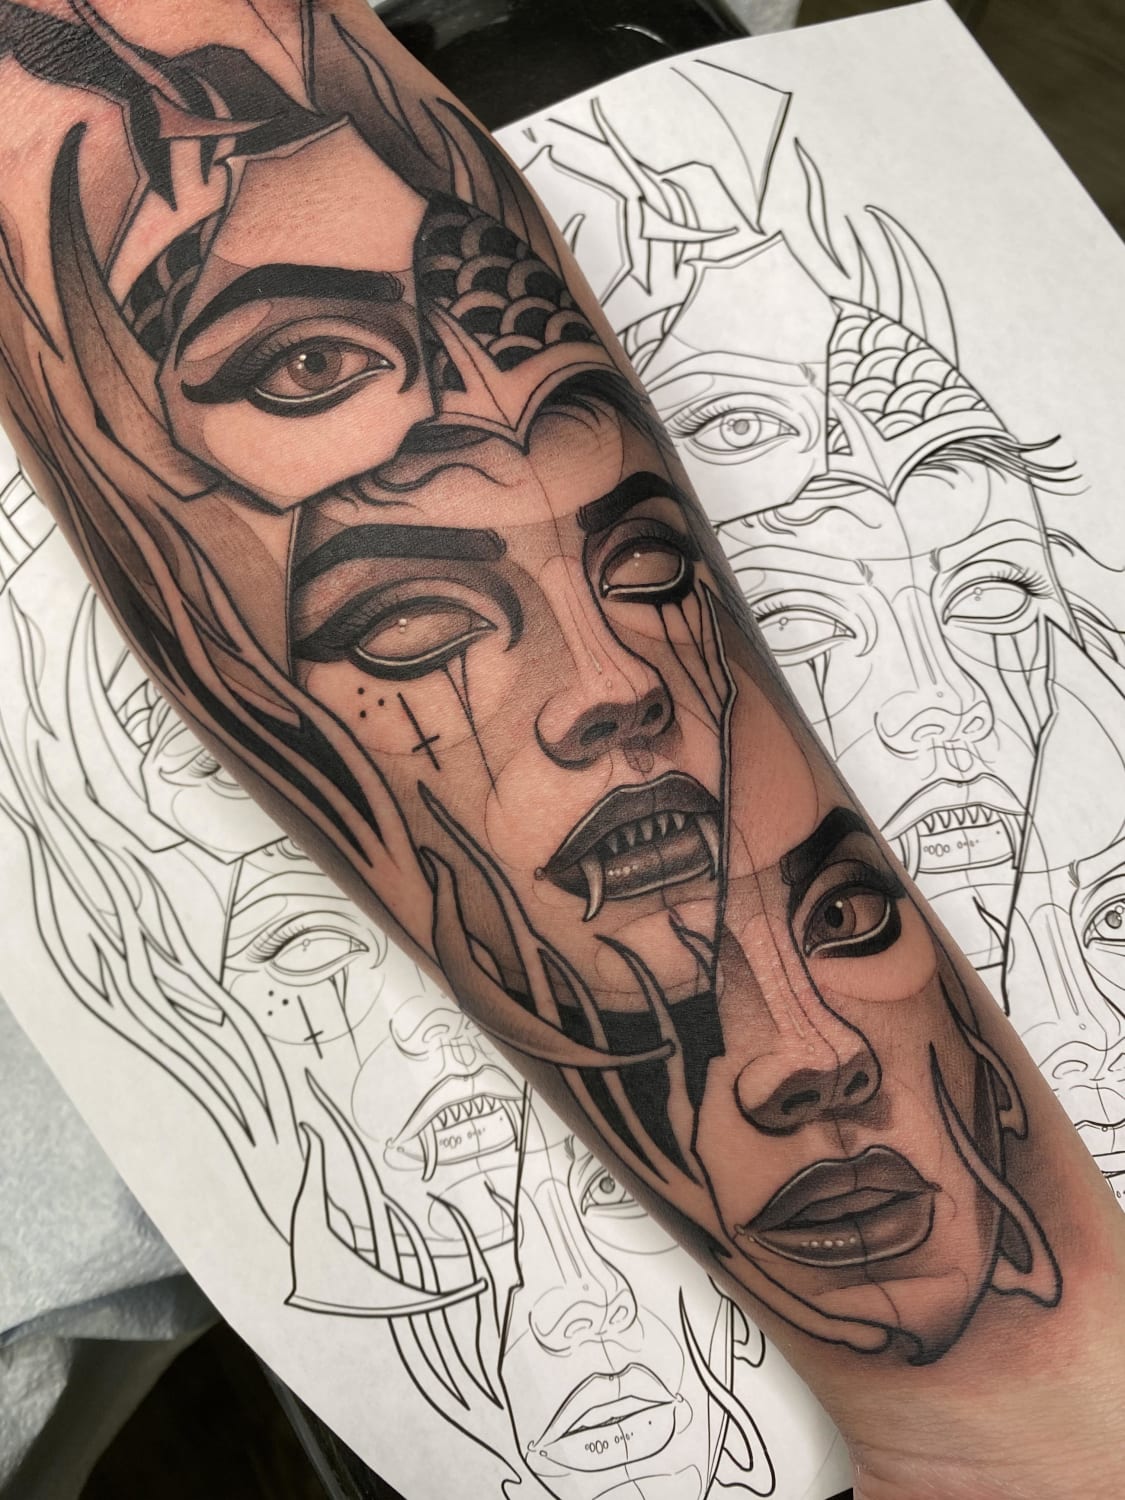 Human face breaking off from demon face by Gian Karle at Seven Horses Tattoo, NH